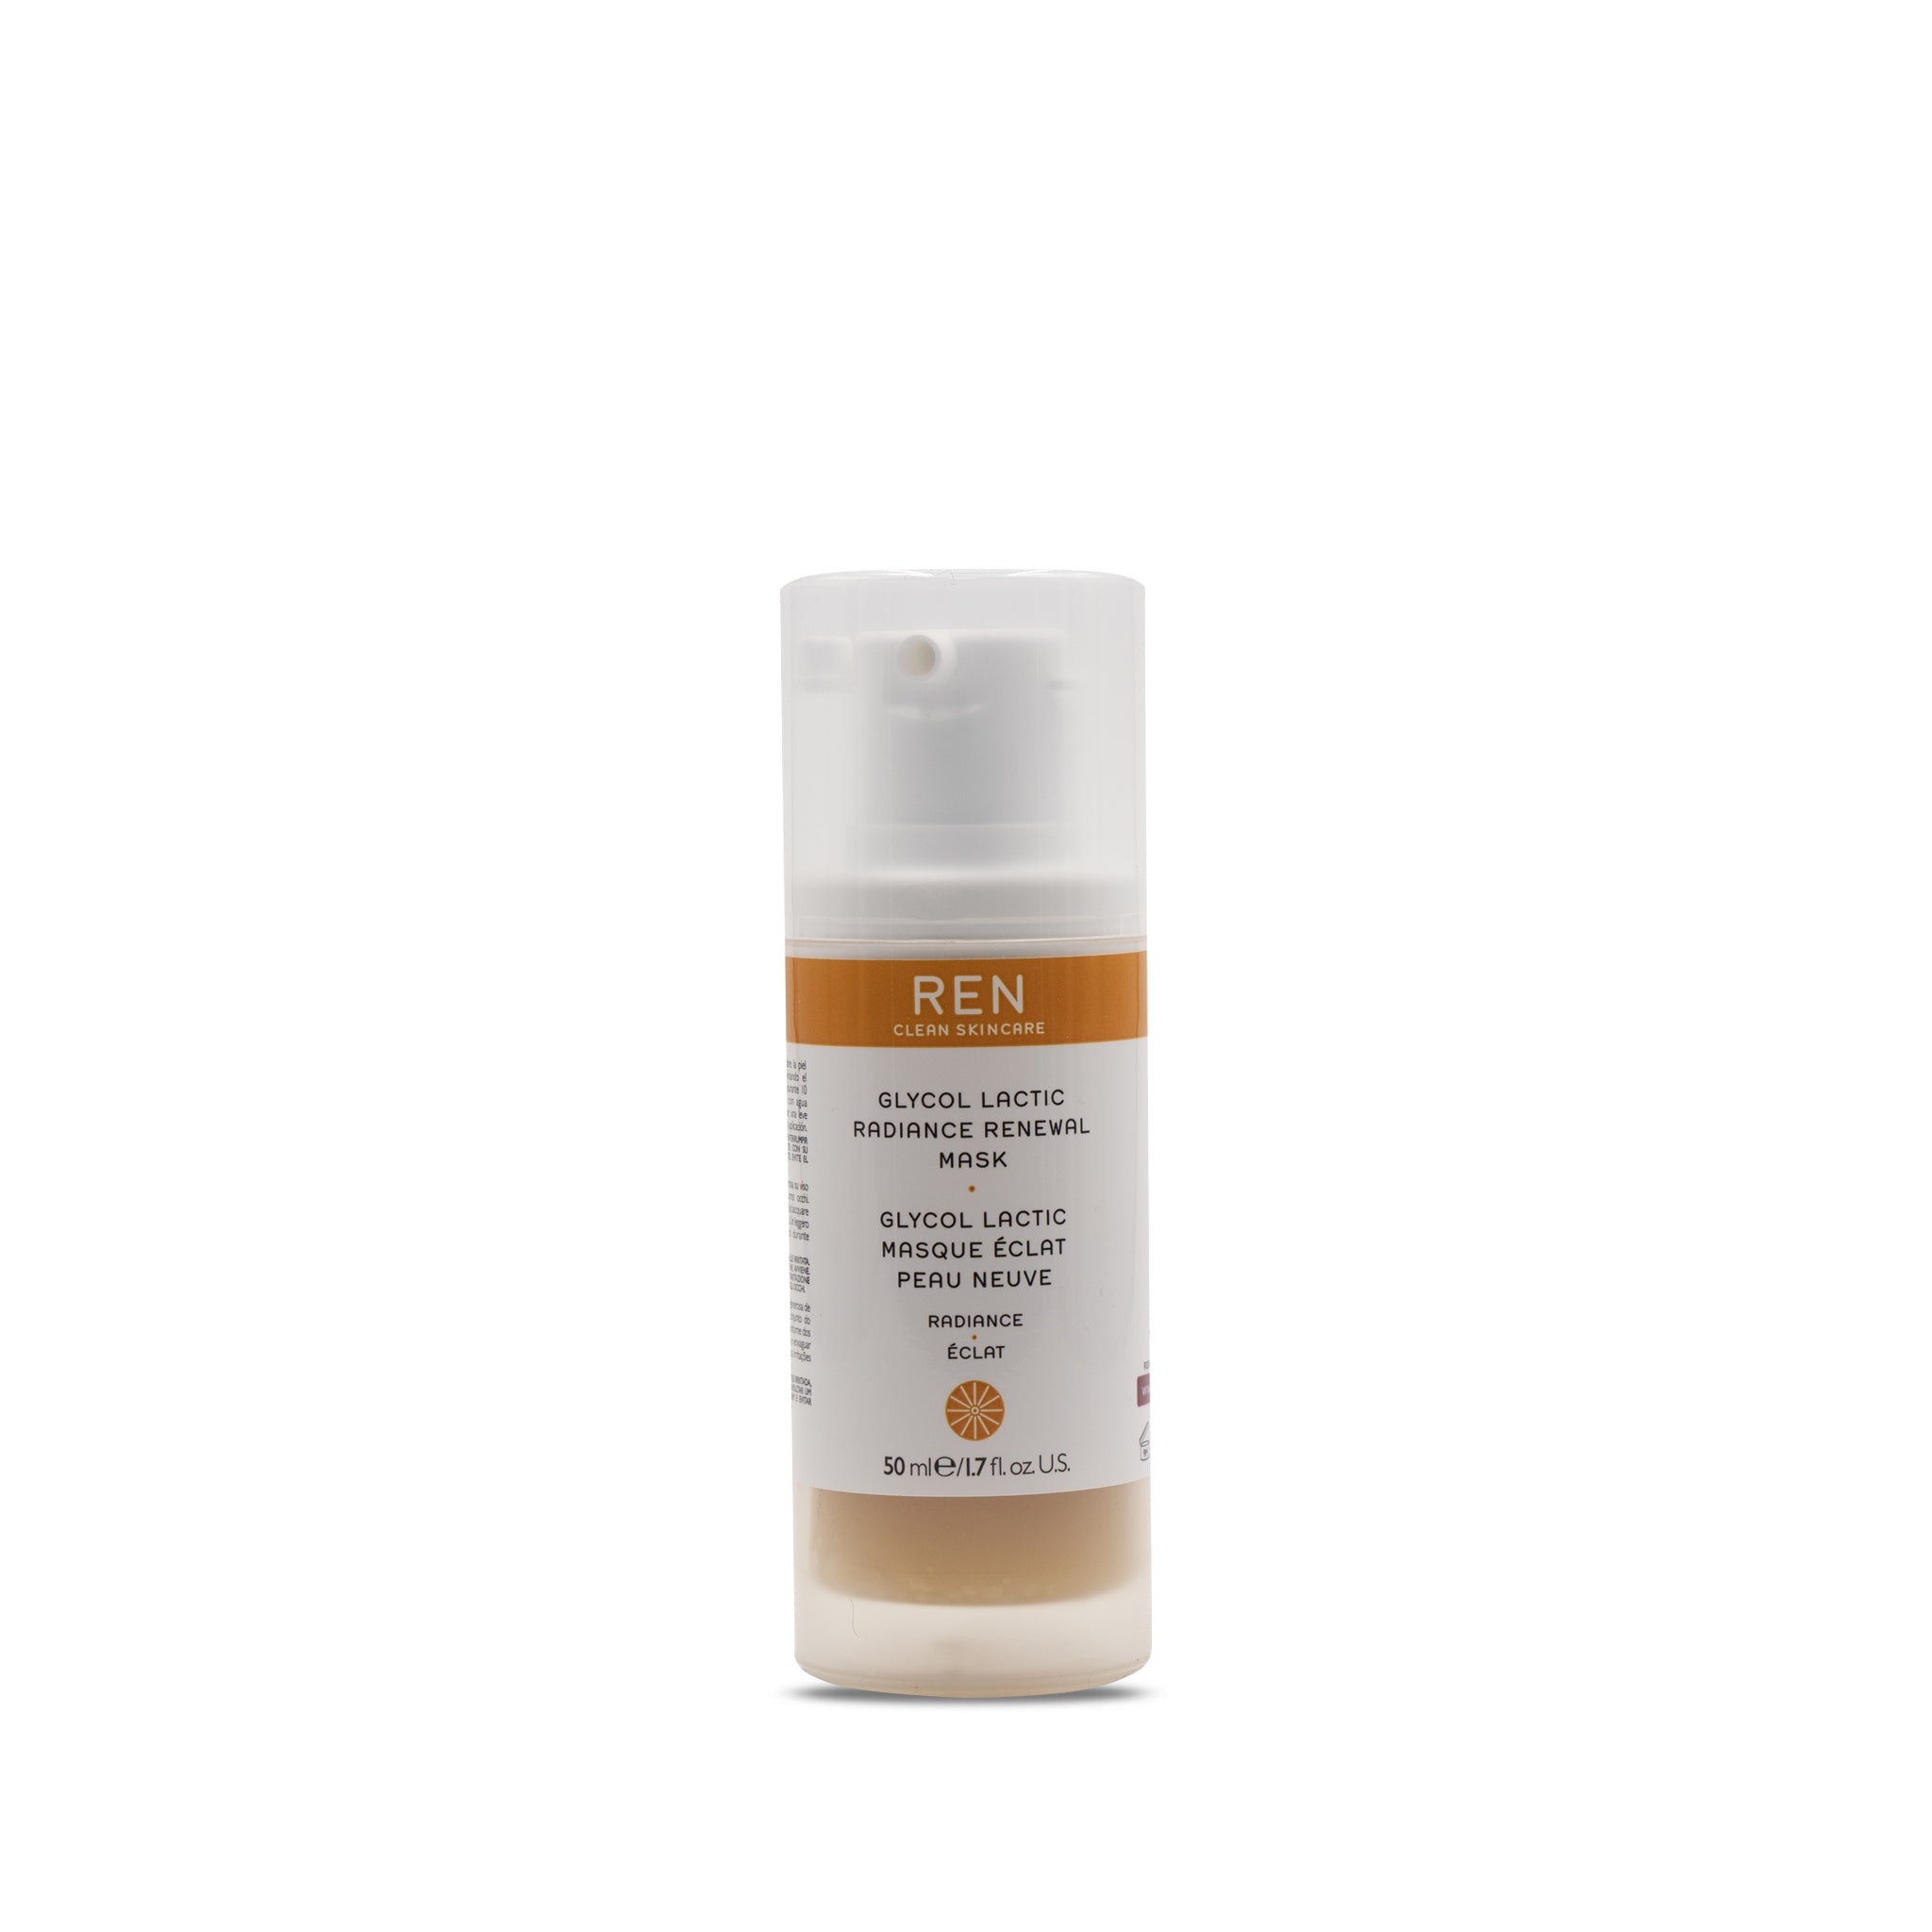 Glycol Lactic Radiance Renewal Mask 50 ml Ren Clean Skincare